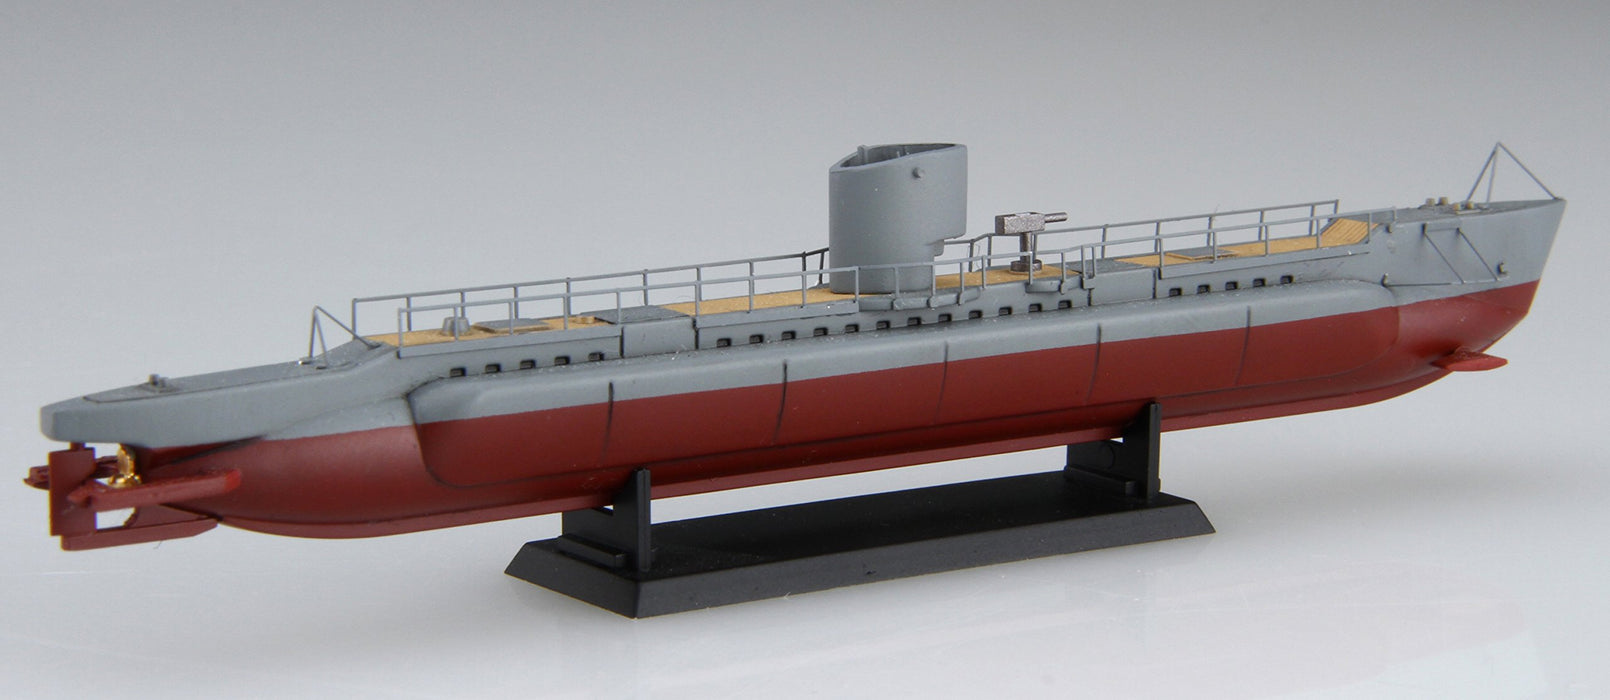 Fujimi Model 1/350 Special Series No.14 Japanese Army Type 3 Submersible Transport Boat  Maruyu  Plastic Model Special 14